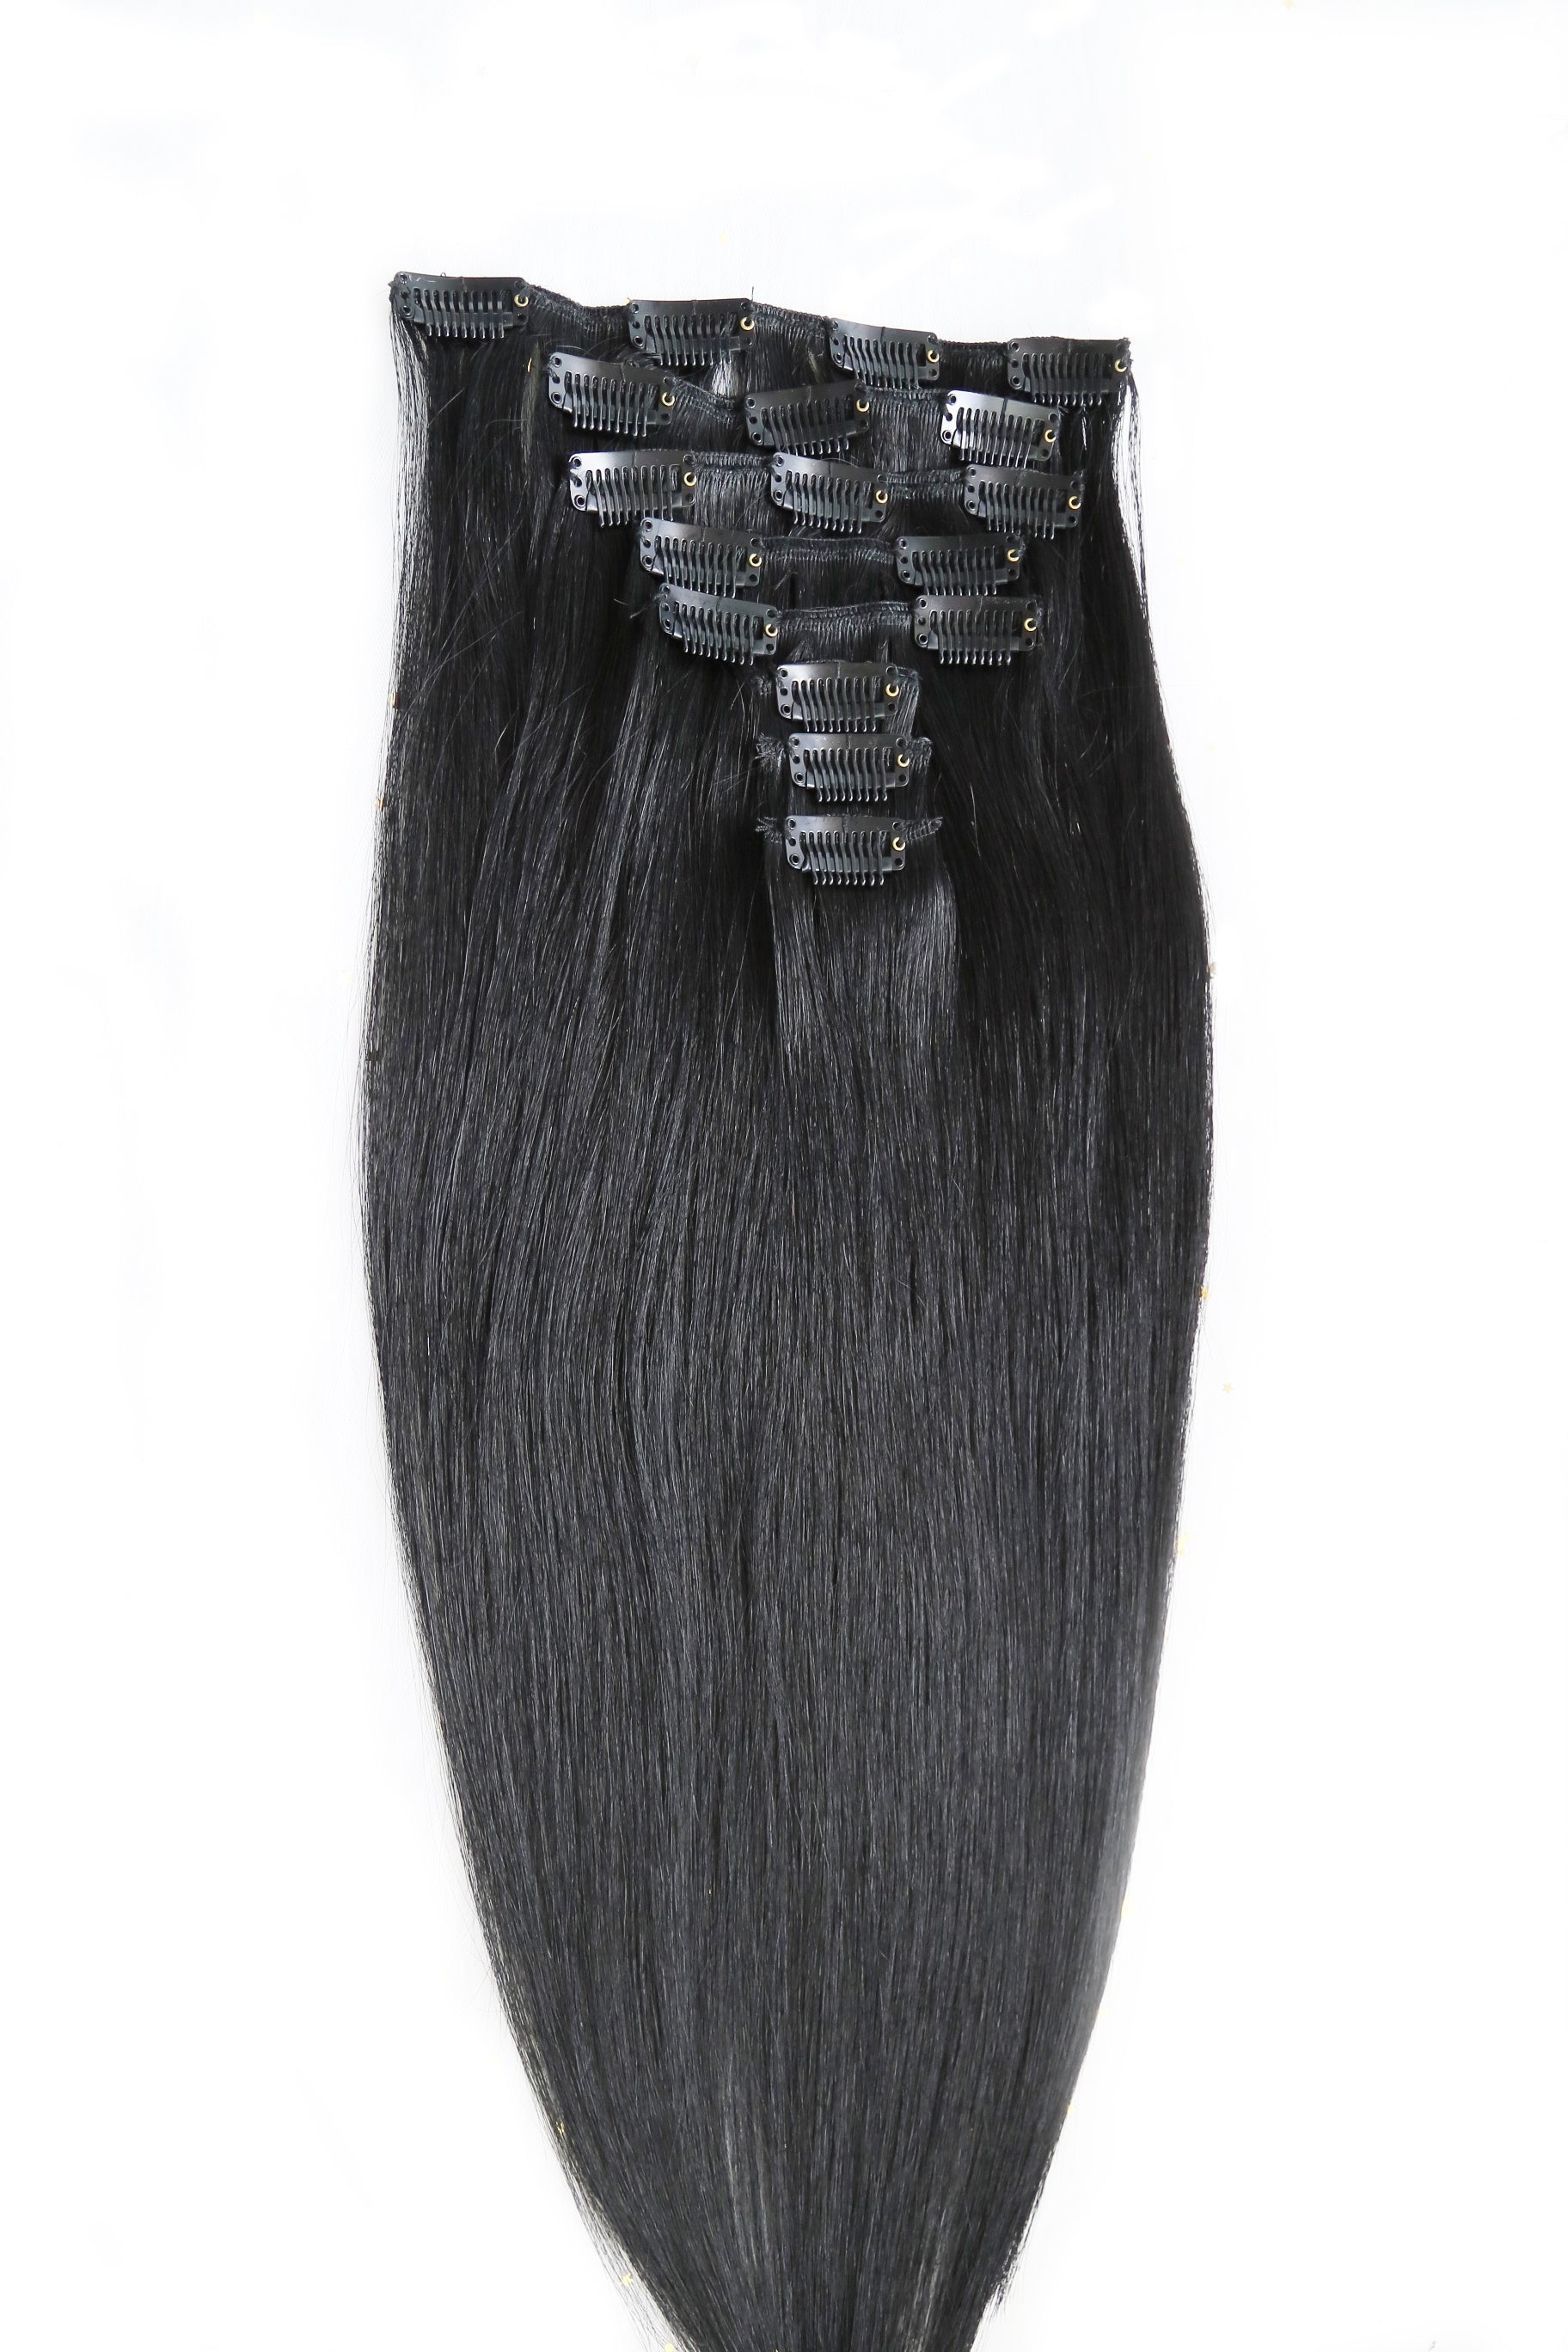 Clip In Hair Extensions Jet Black Clip Ins| Hairperfecto